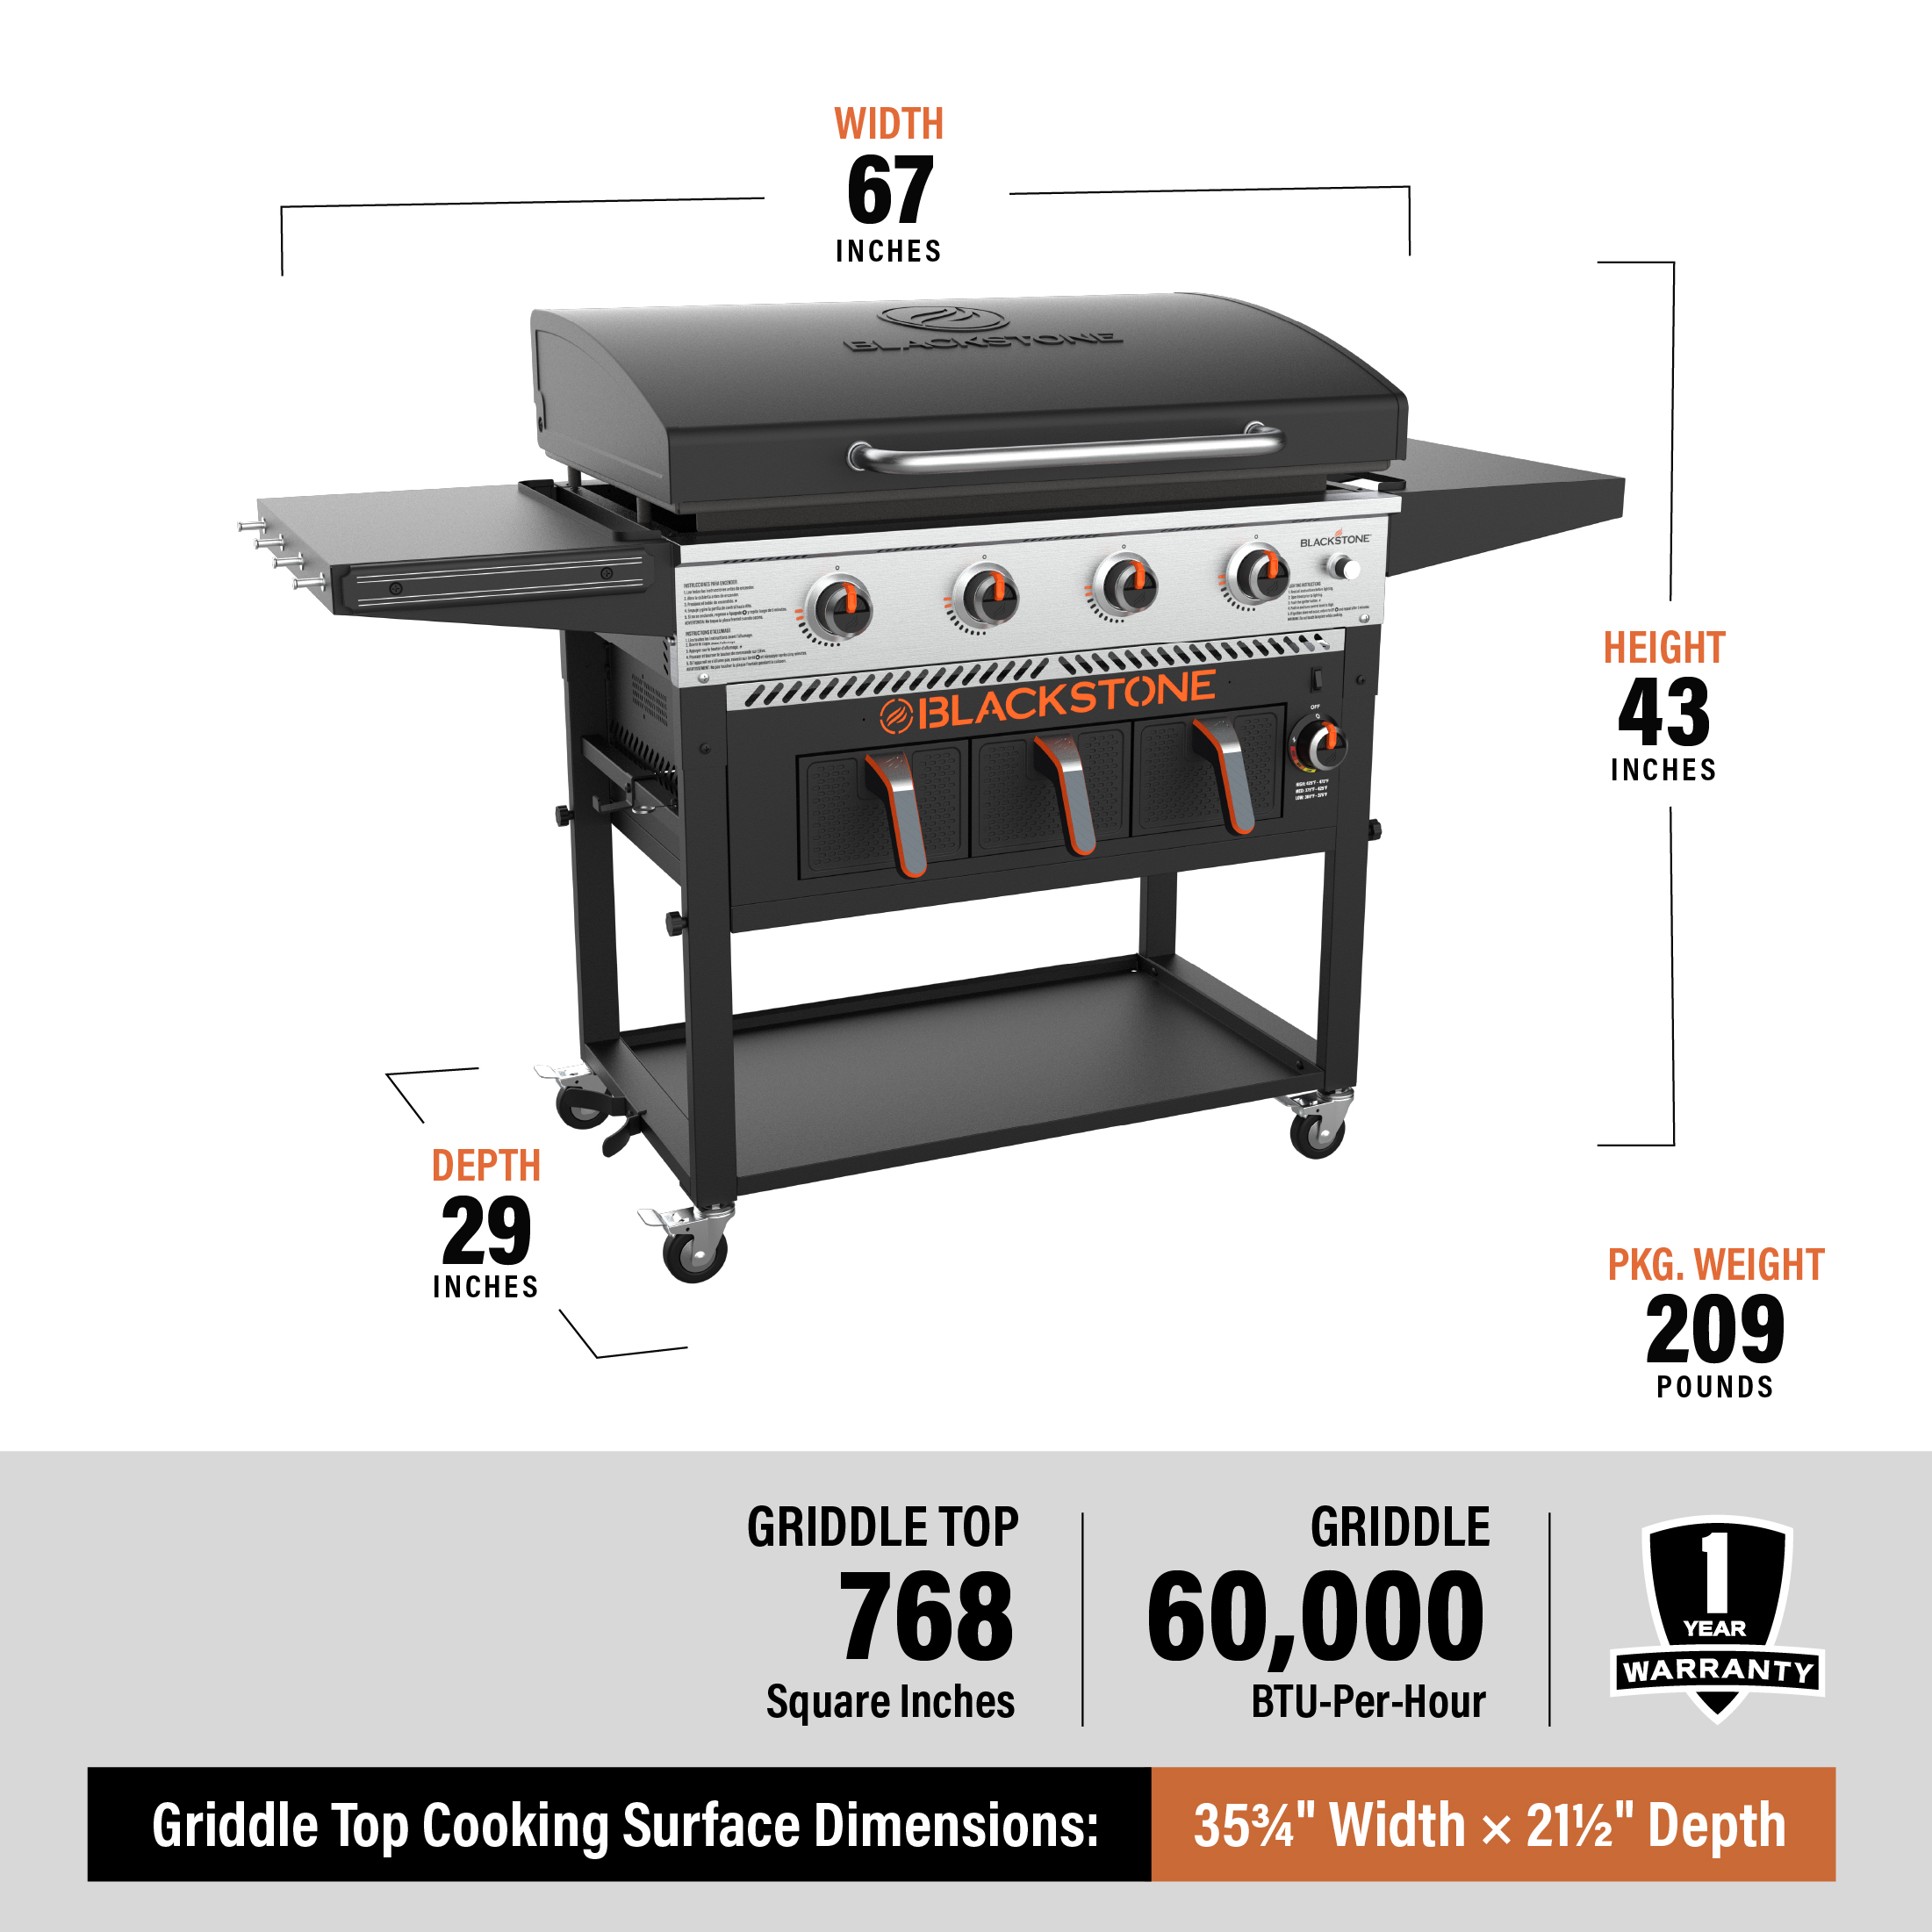 Blackstone 4-Burner 36" Propane Griddle with Air Fryer and Hood - image 6 of 23